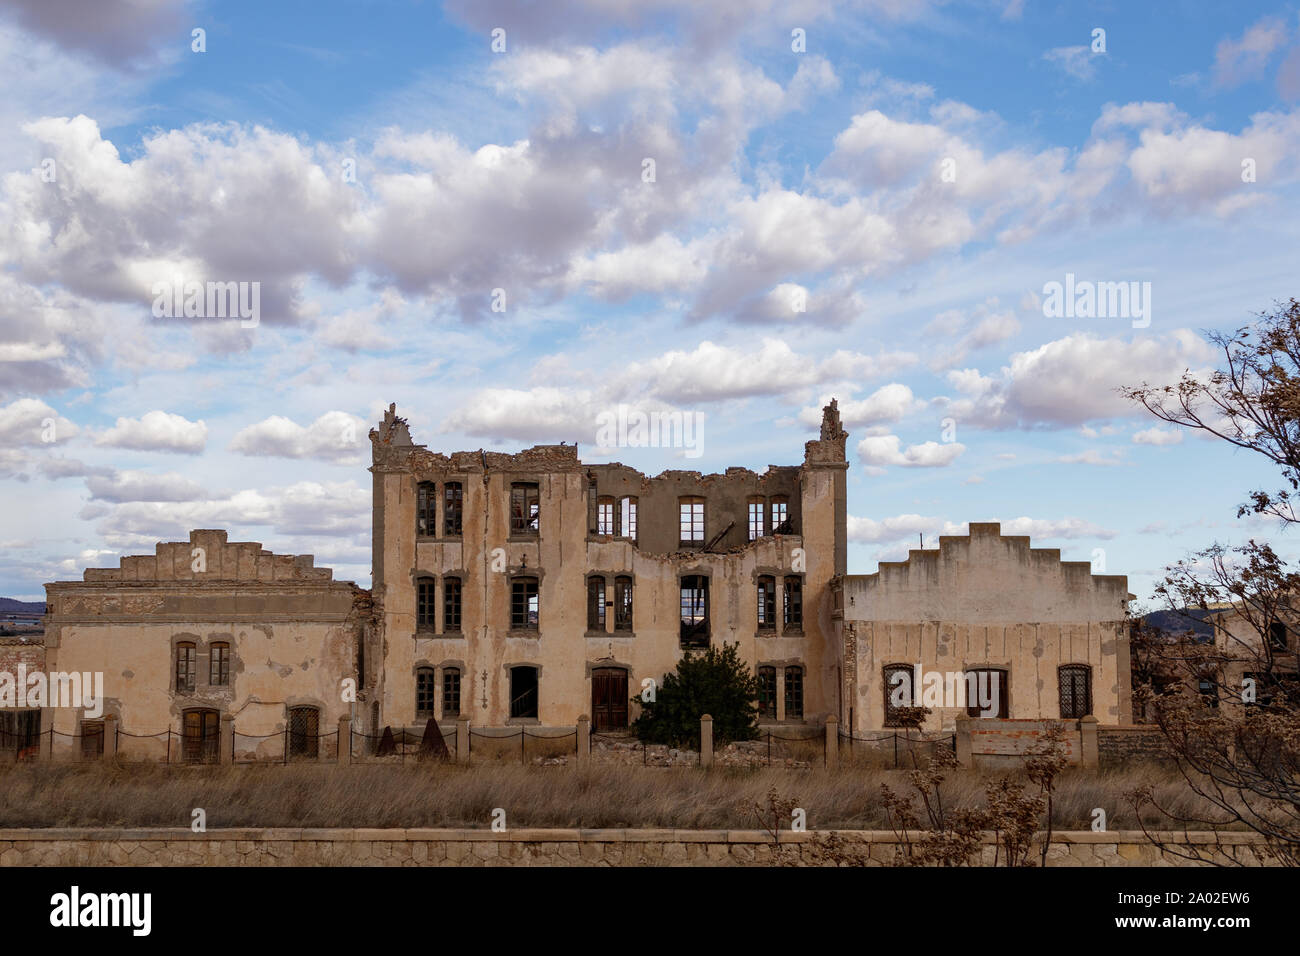 Old mansion house falling into ruins in rural spain Stock Photo